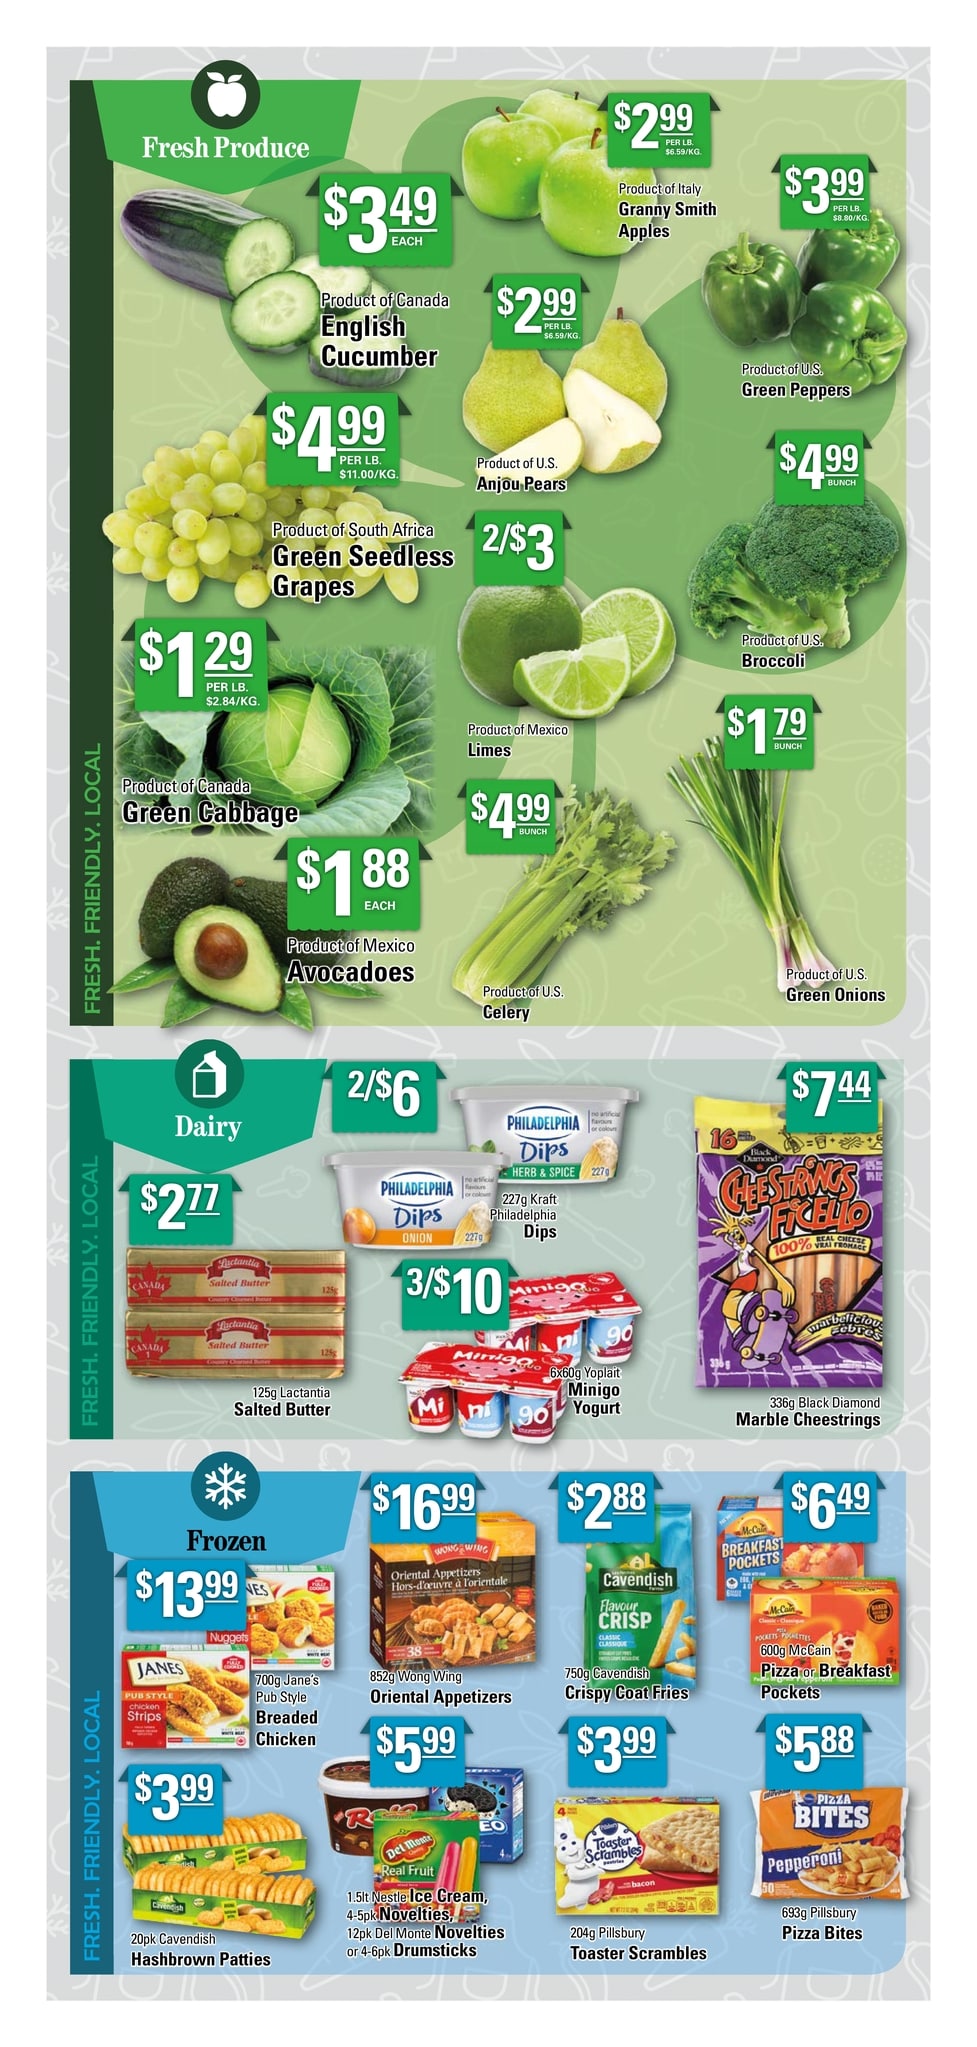 Powell's Supermarket - Weekly Flyer Specials - Page 4